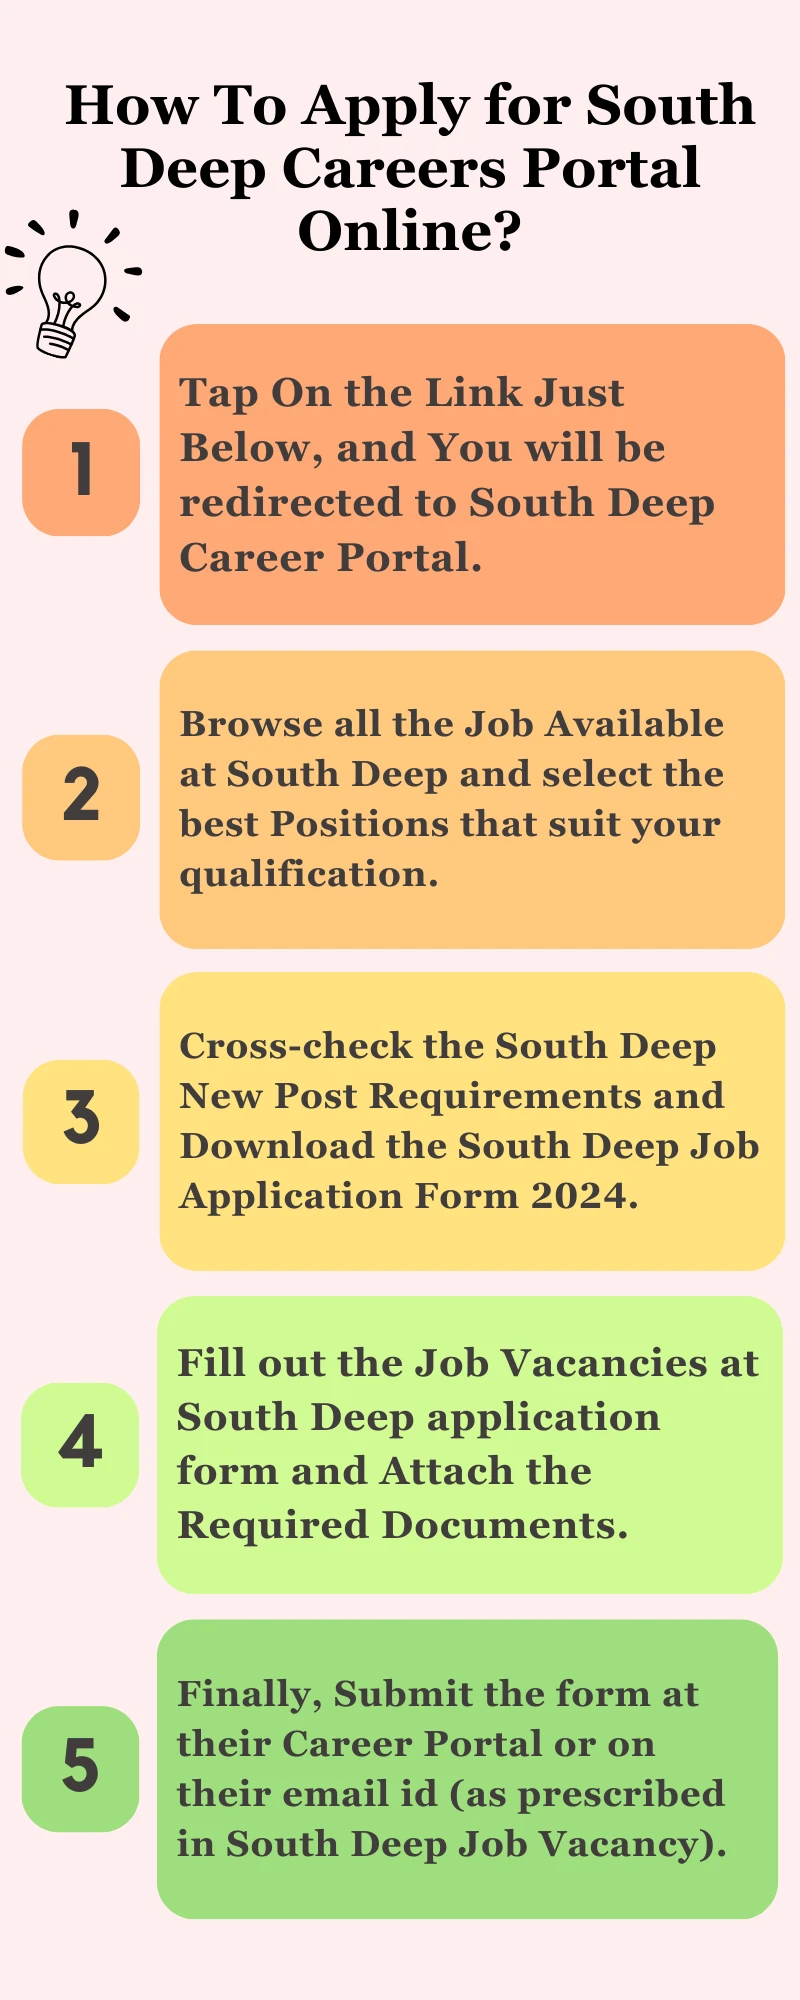 How To Apply for South Deep Careers Portal Online?